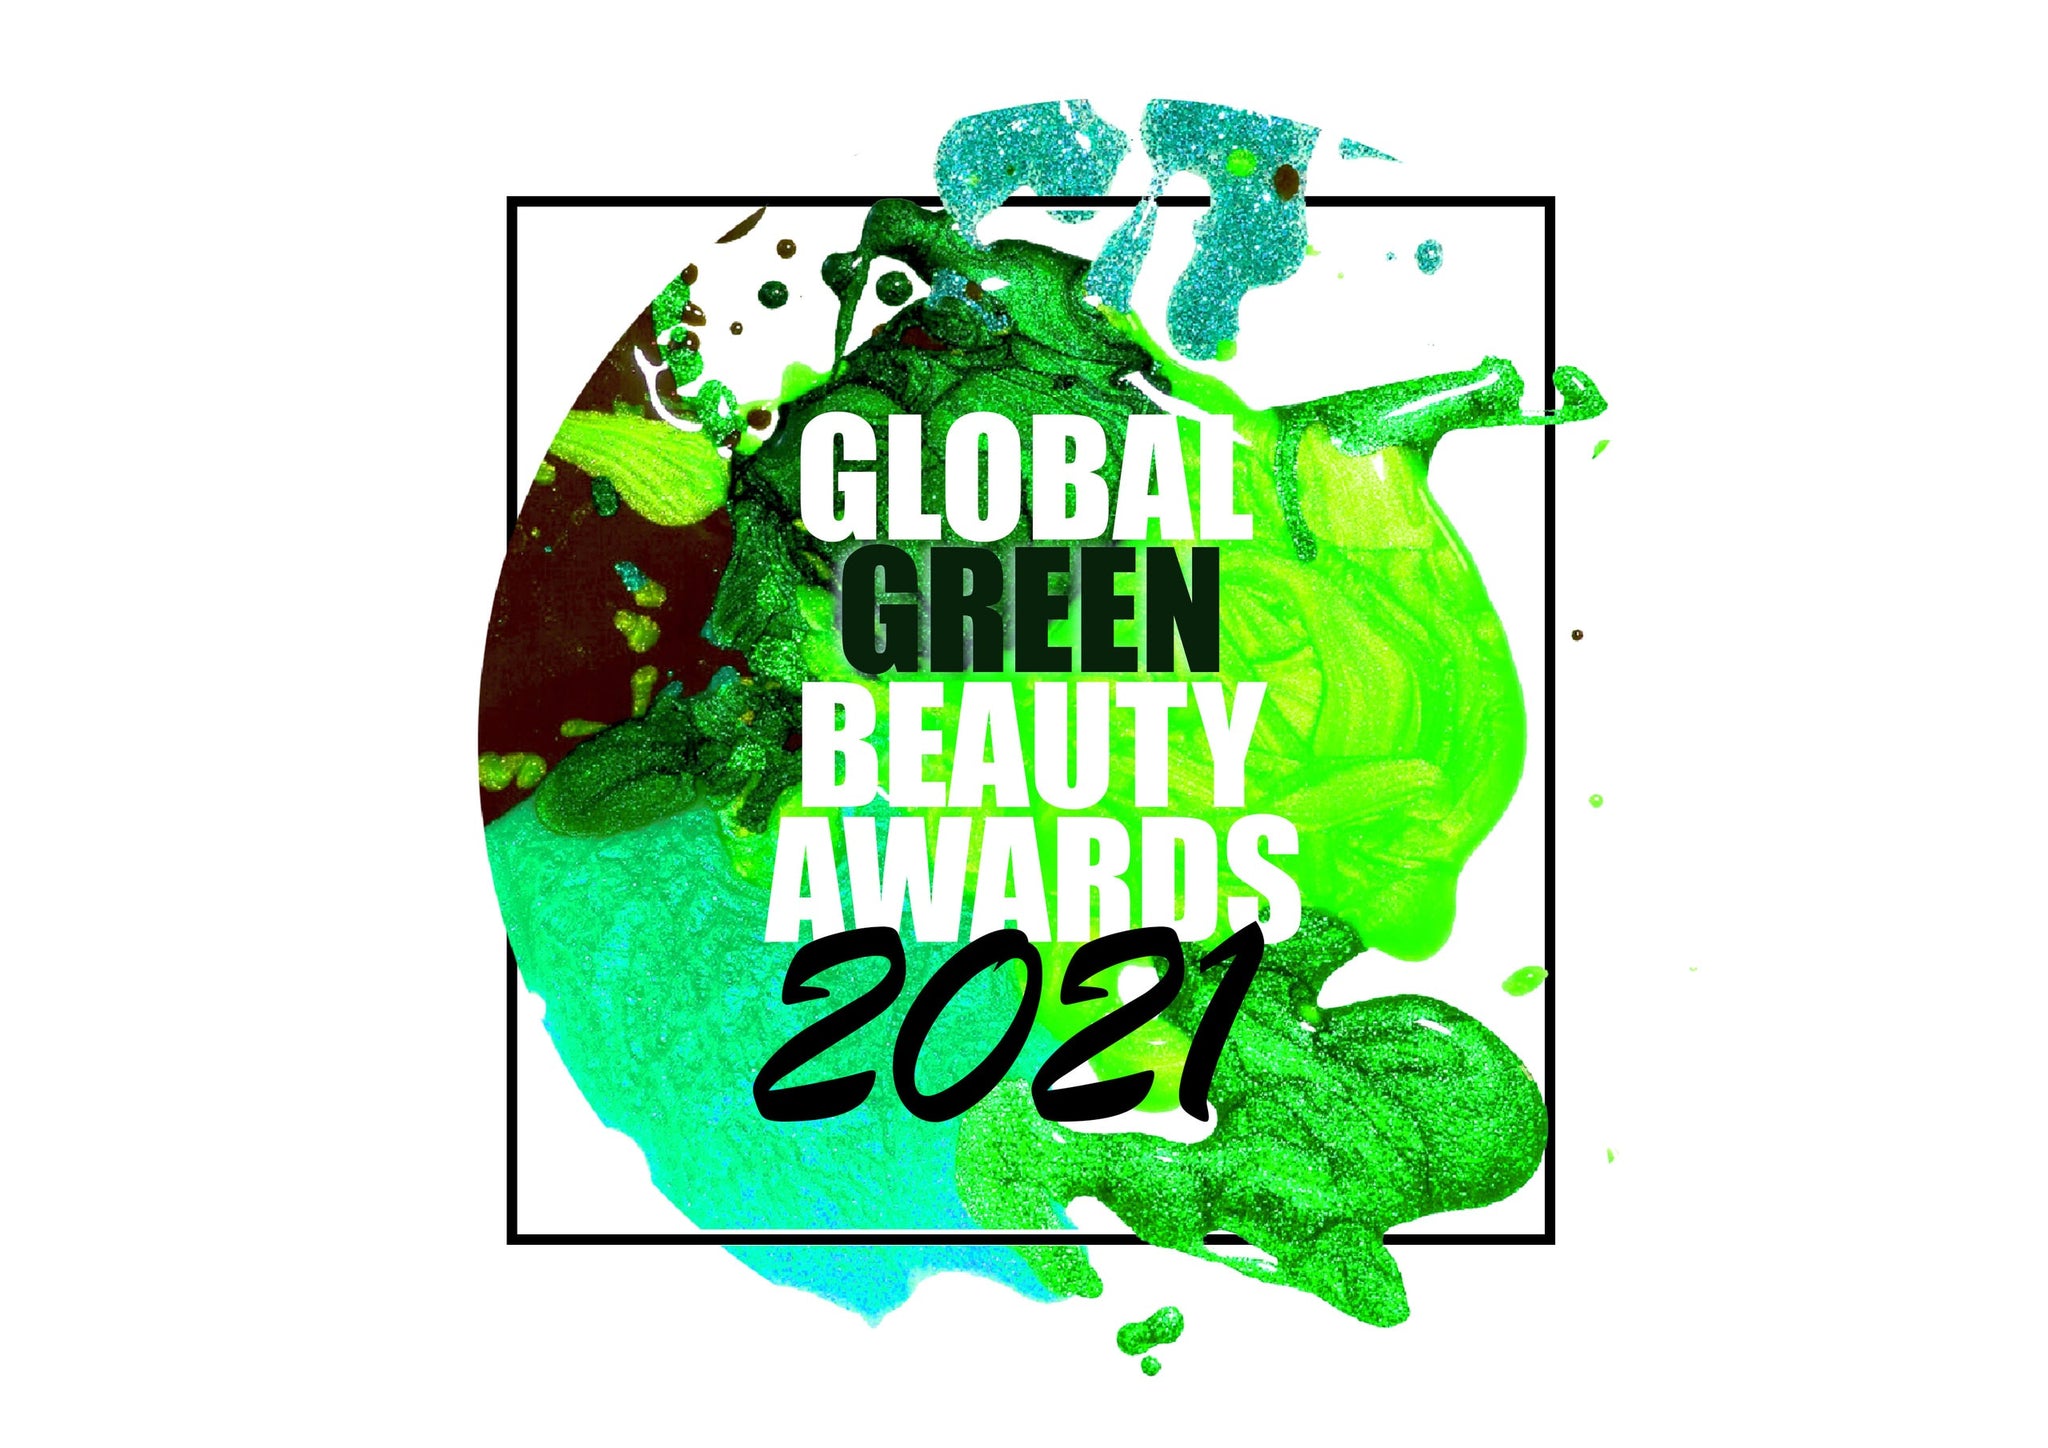 Pili Ani is a winner at the 2021 Global Green Beauty Awards